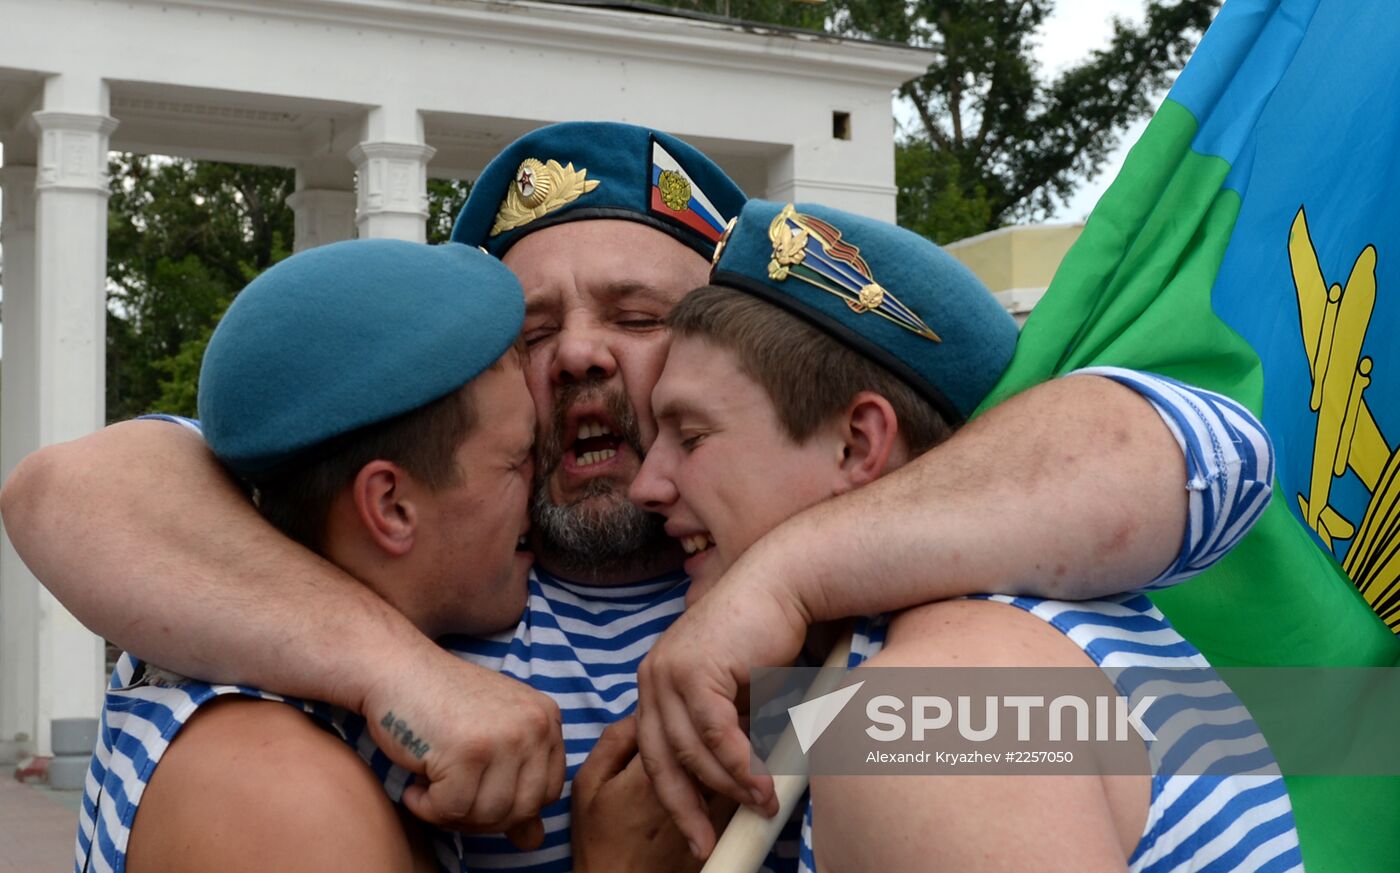 Celebration of Russian Airborne Troops Day